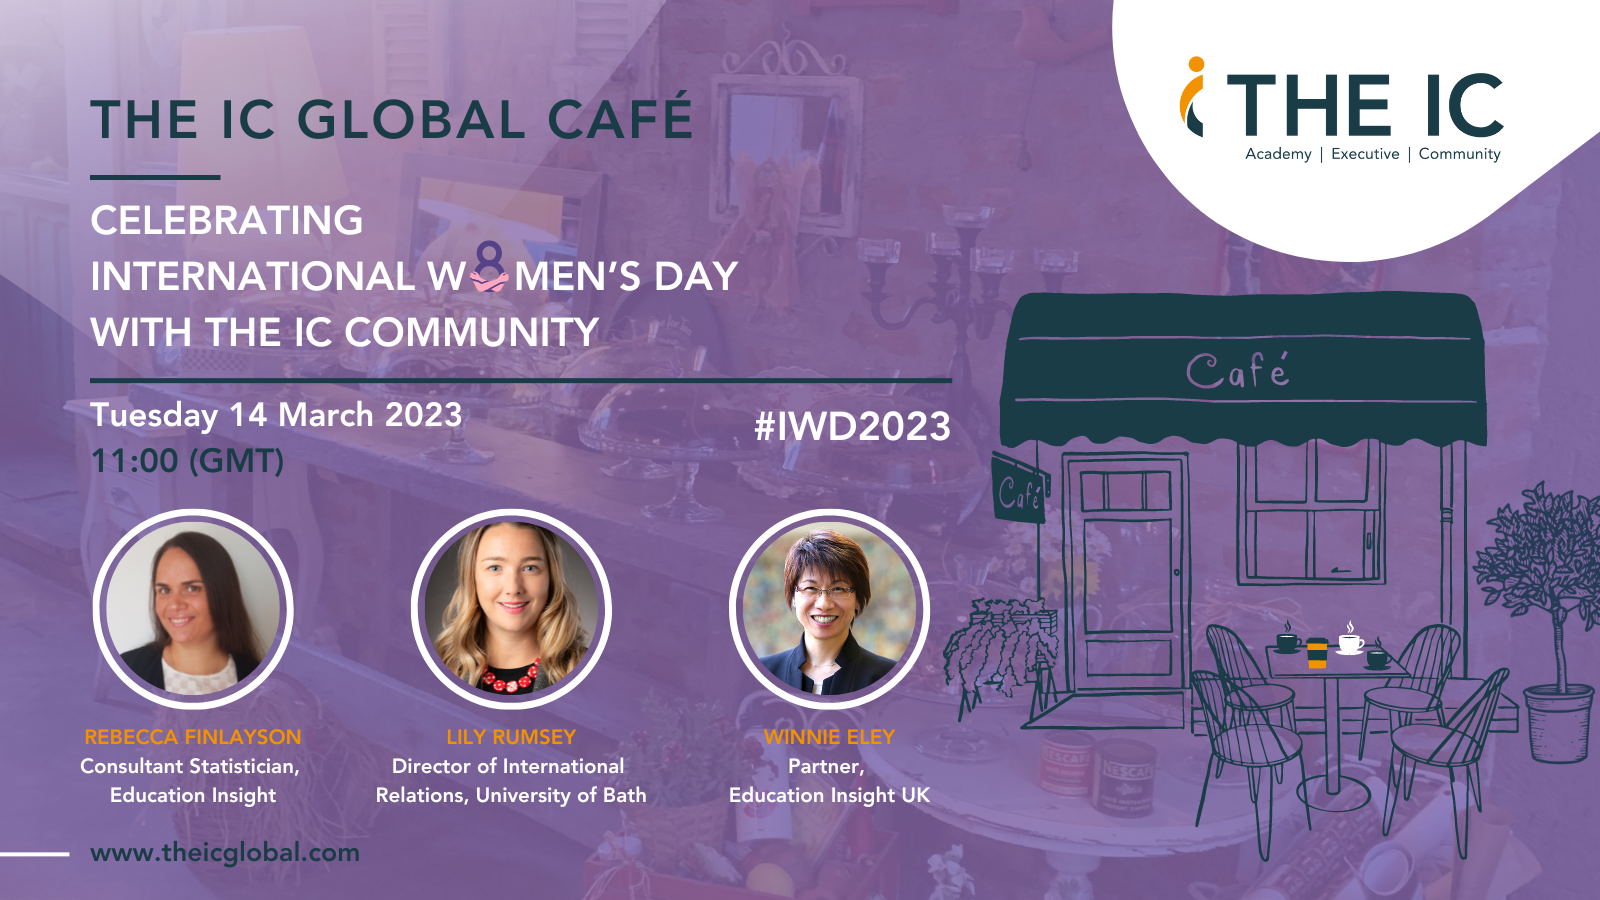 The IC Global Café: ‘Celebrating International Women’s Day with The IC Community’